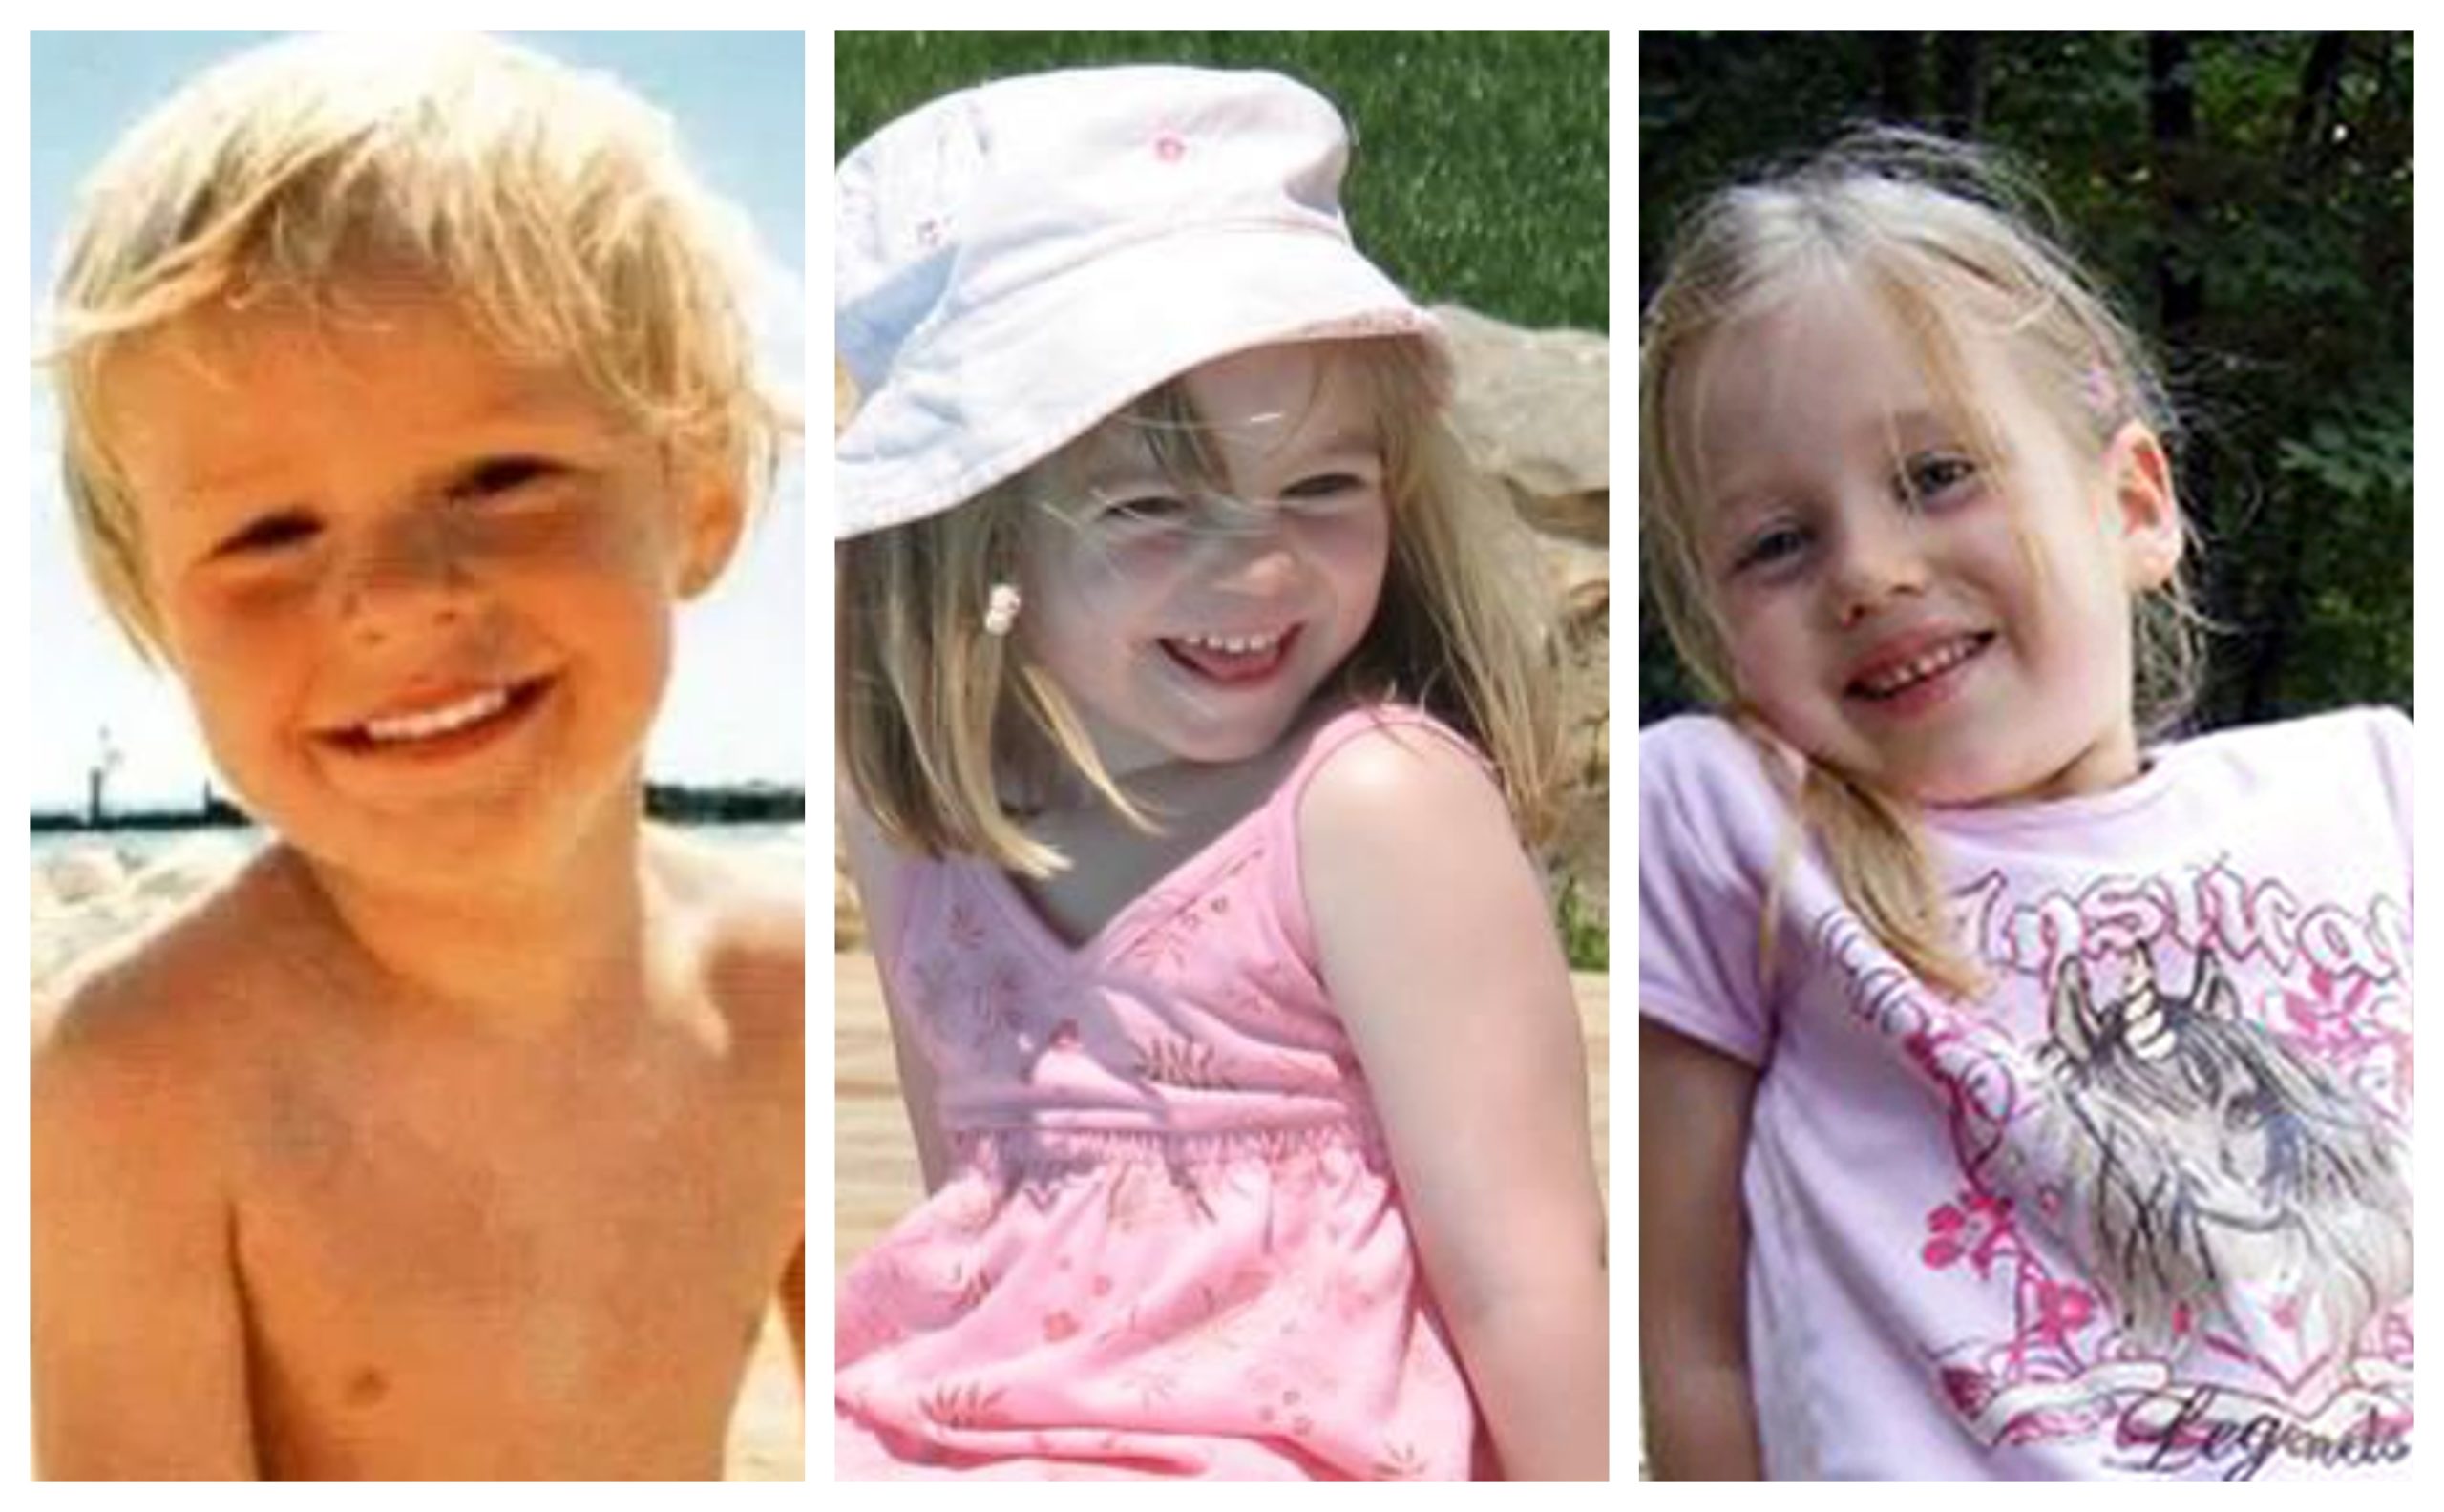 Police are probing links between the disappearances of Rene Hasee, left, Inga Gehricke, right, and Madeleine McCann